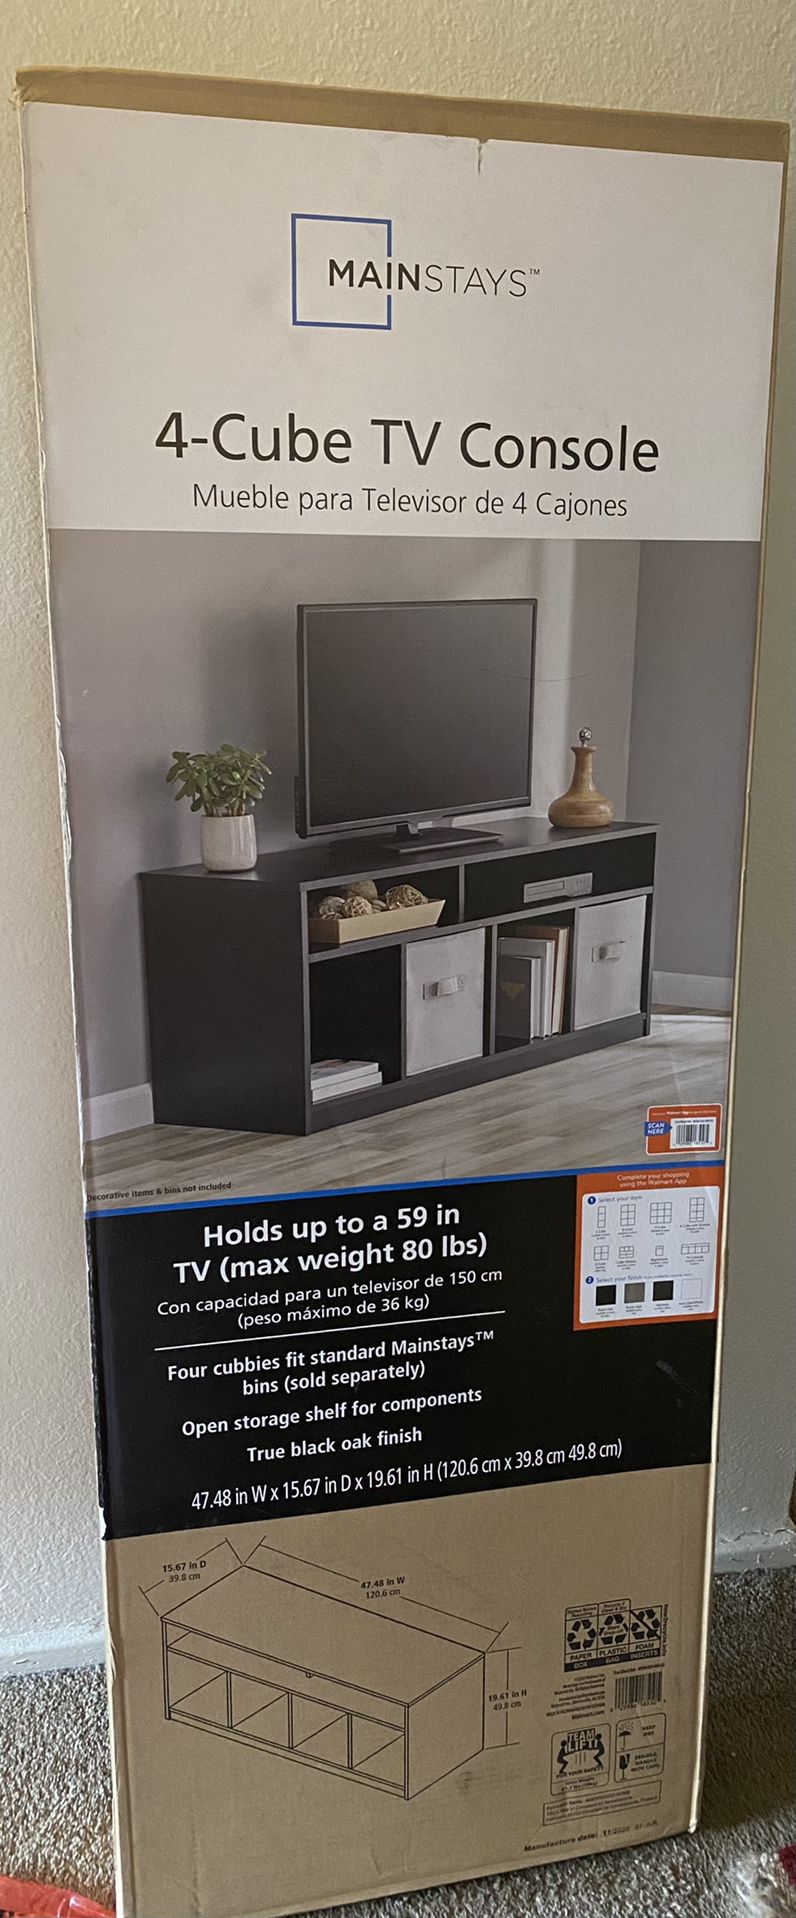 Mainstays 4 Cube TV Console for TVs Up to 59 inches True Black Oak TV Stand